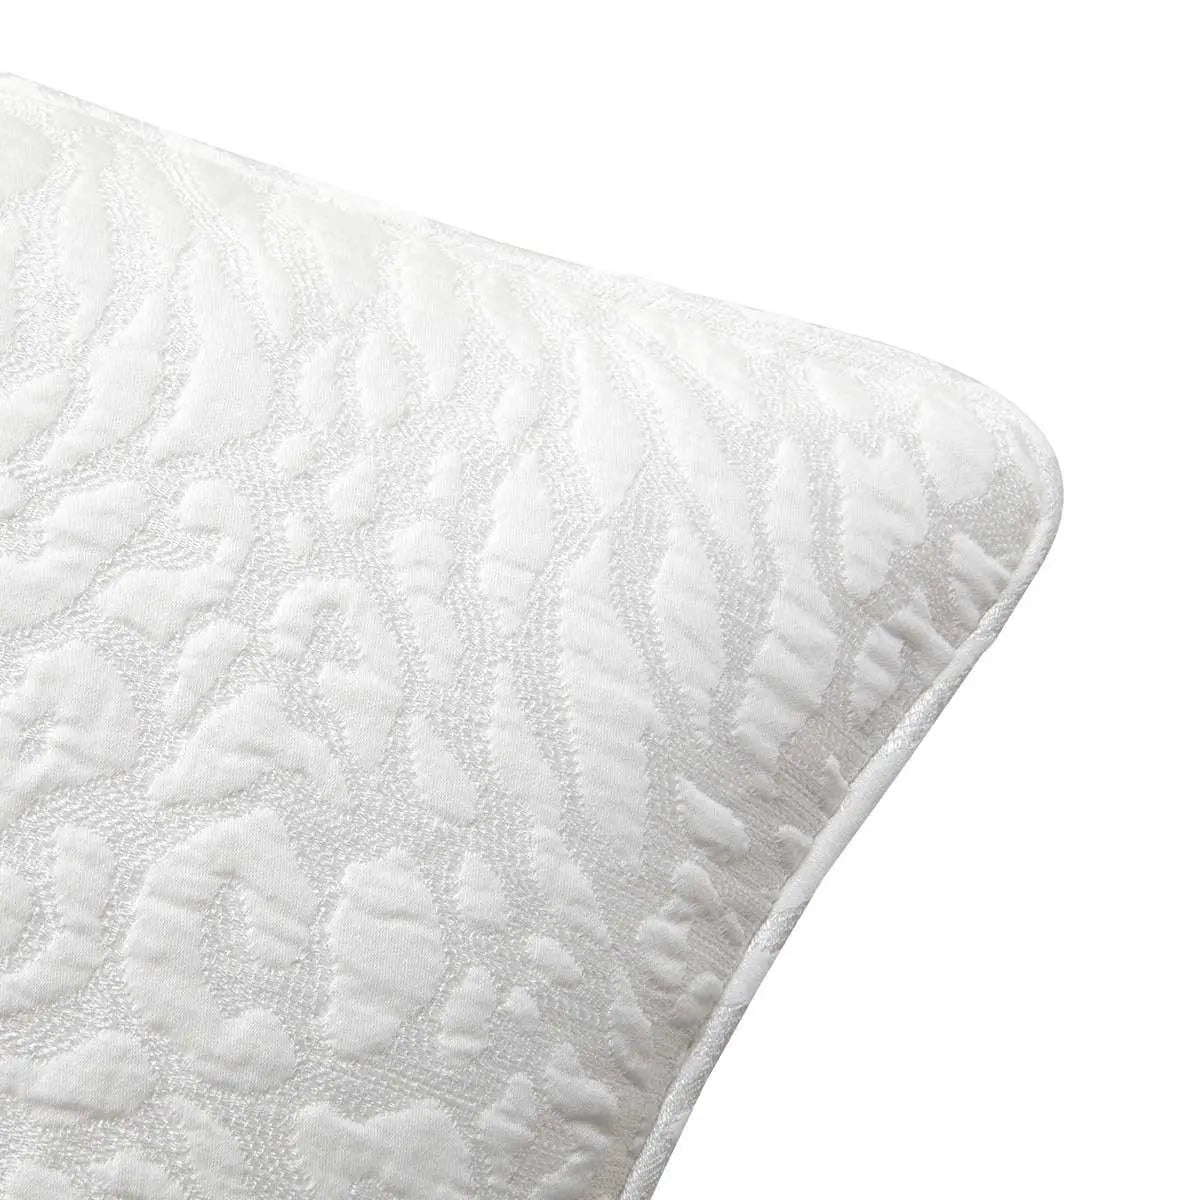 Close up of Yves Delorme Souvenir Decorative Pillow in Blanc